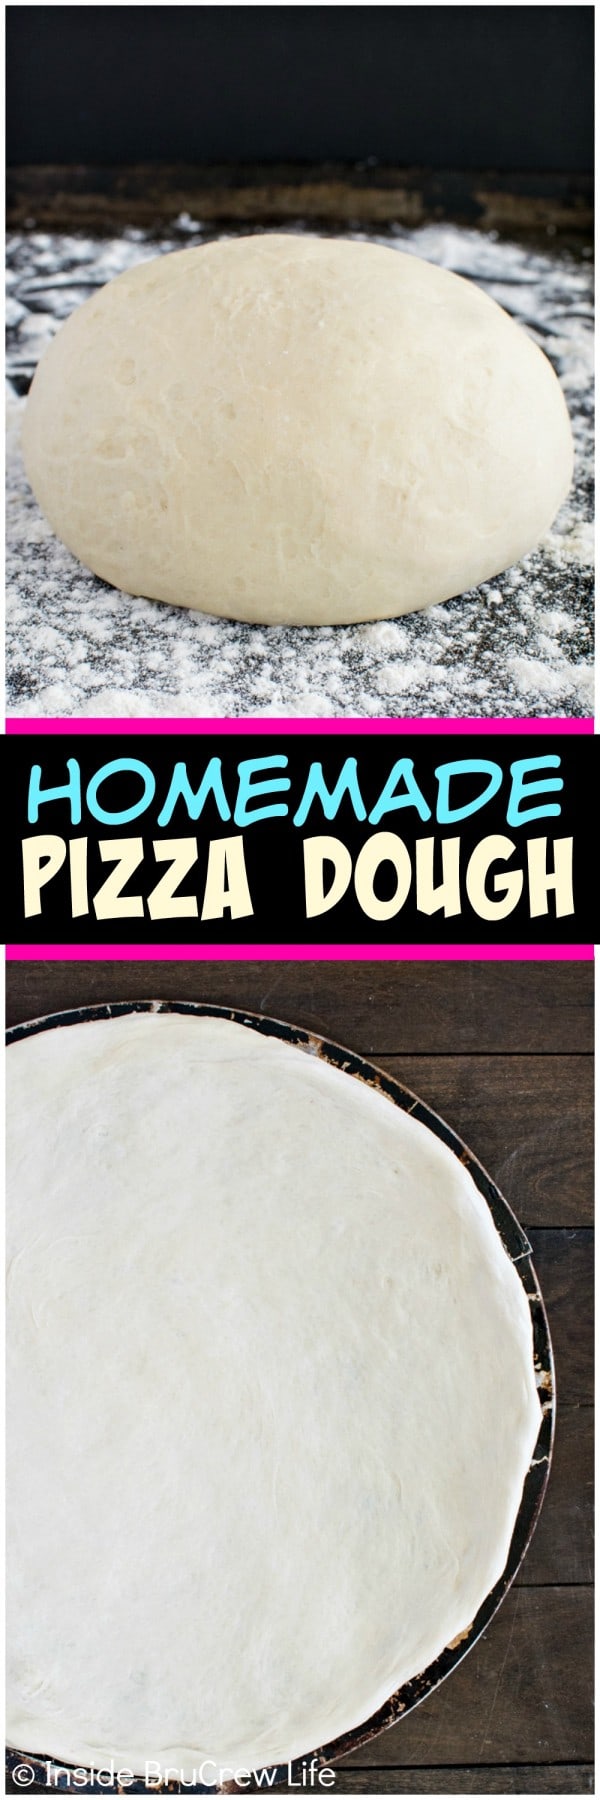 Homemade Pizza Dough - making pizza, breadsticks, and calzones is easy to do at home with this dough recipe. 